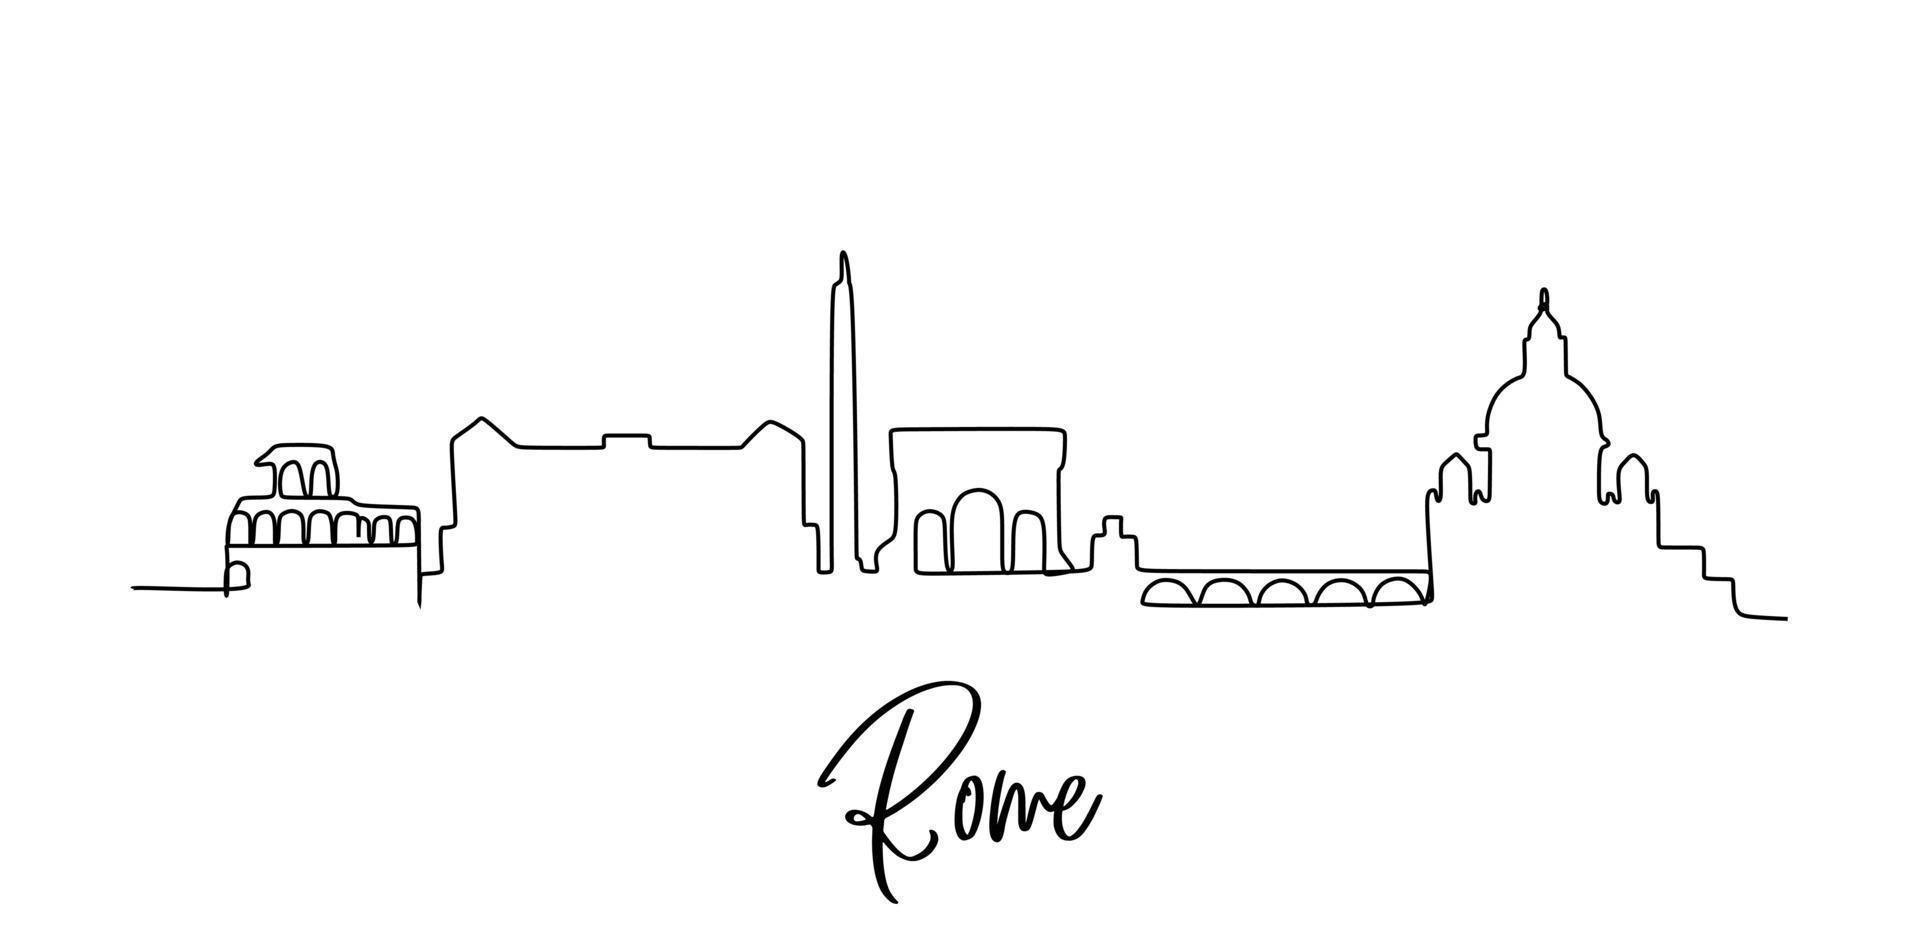 Single continuous line drawing of Rome city skyline Italy. Famous Roma city skyscraper landscape. World travel home wall decor poster print art concept. Modern one line draw design vector illustration